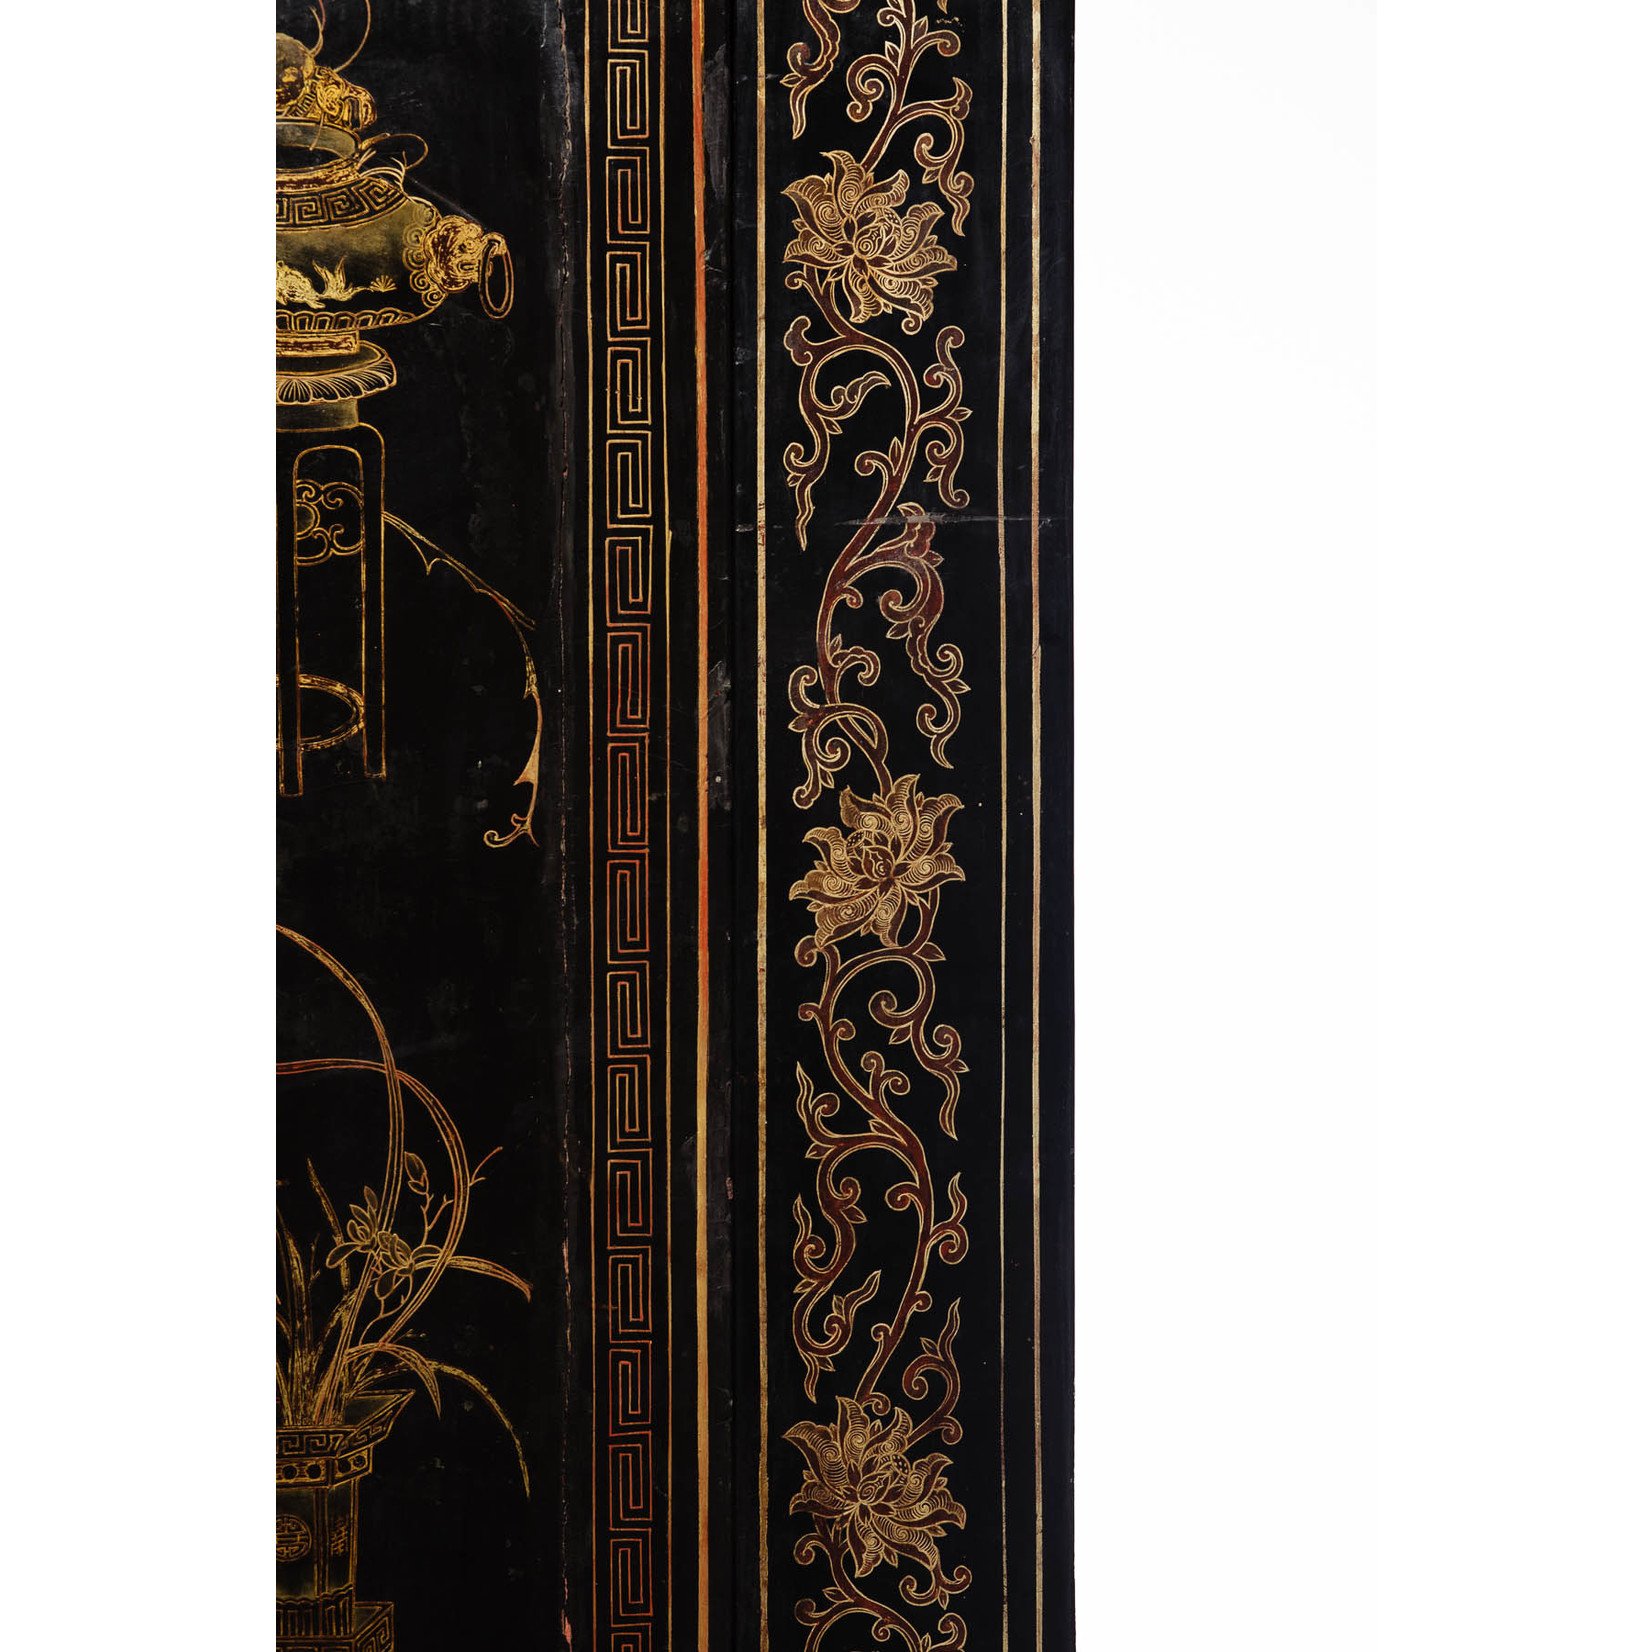 Lawrence Collection Antique Chinese Black Gold Lacquer Cabinet